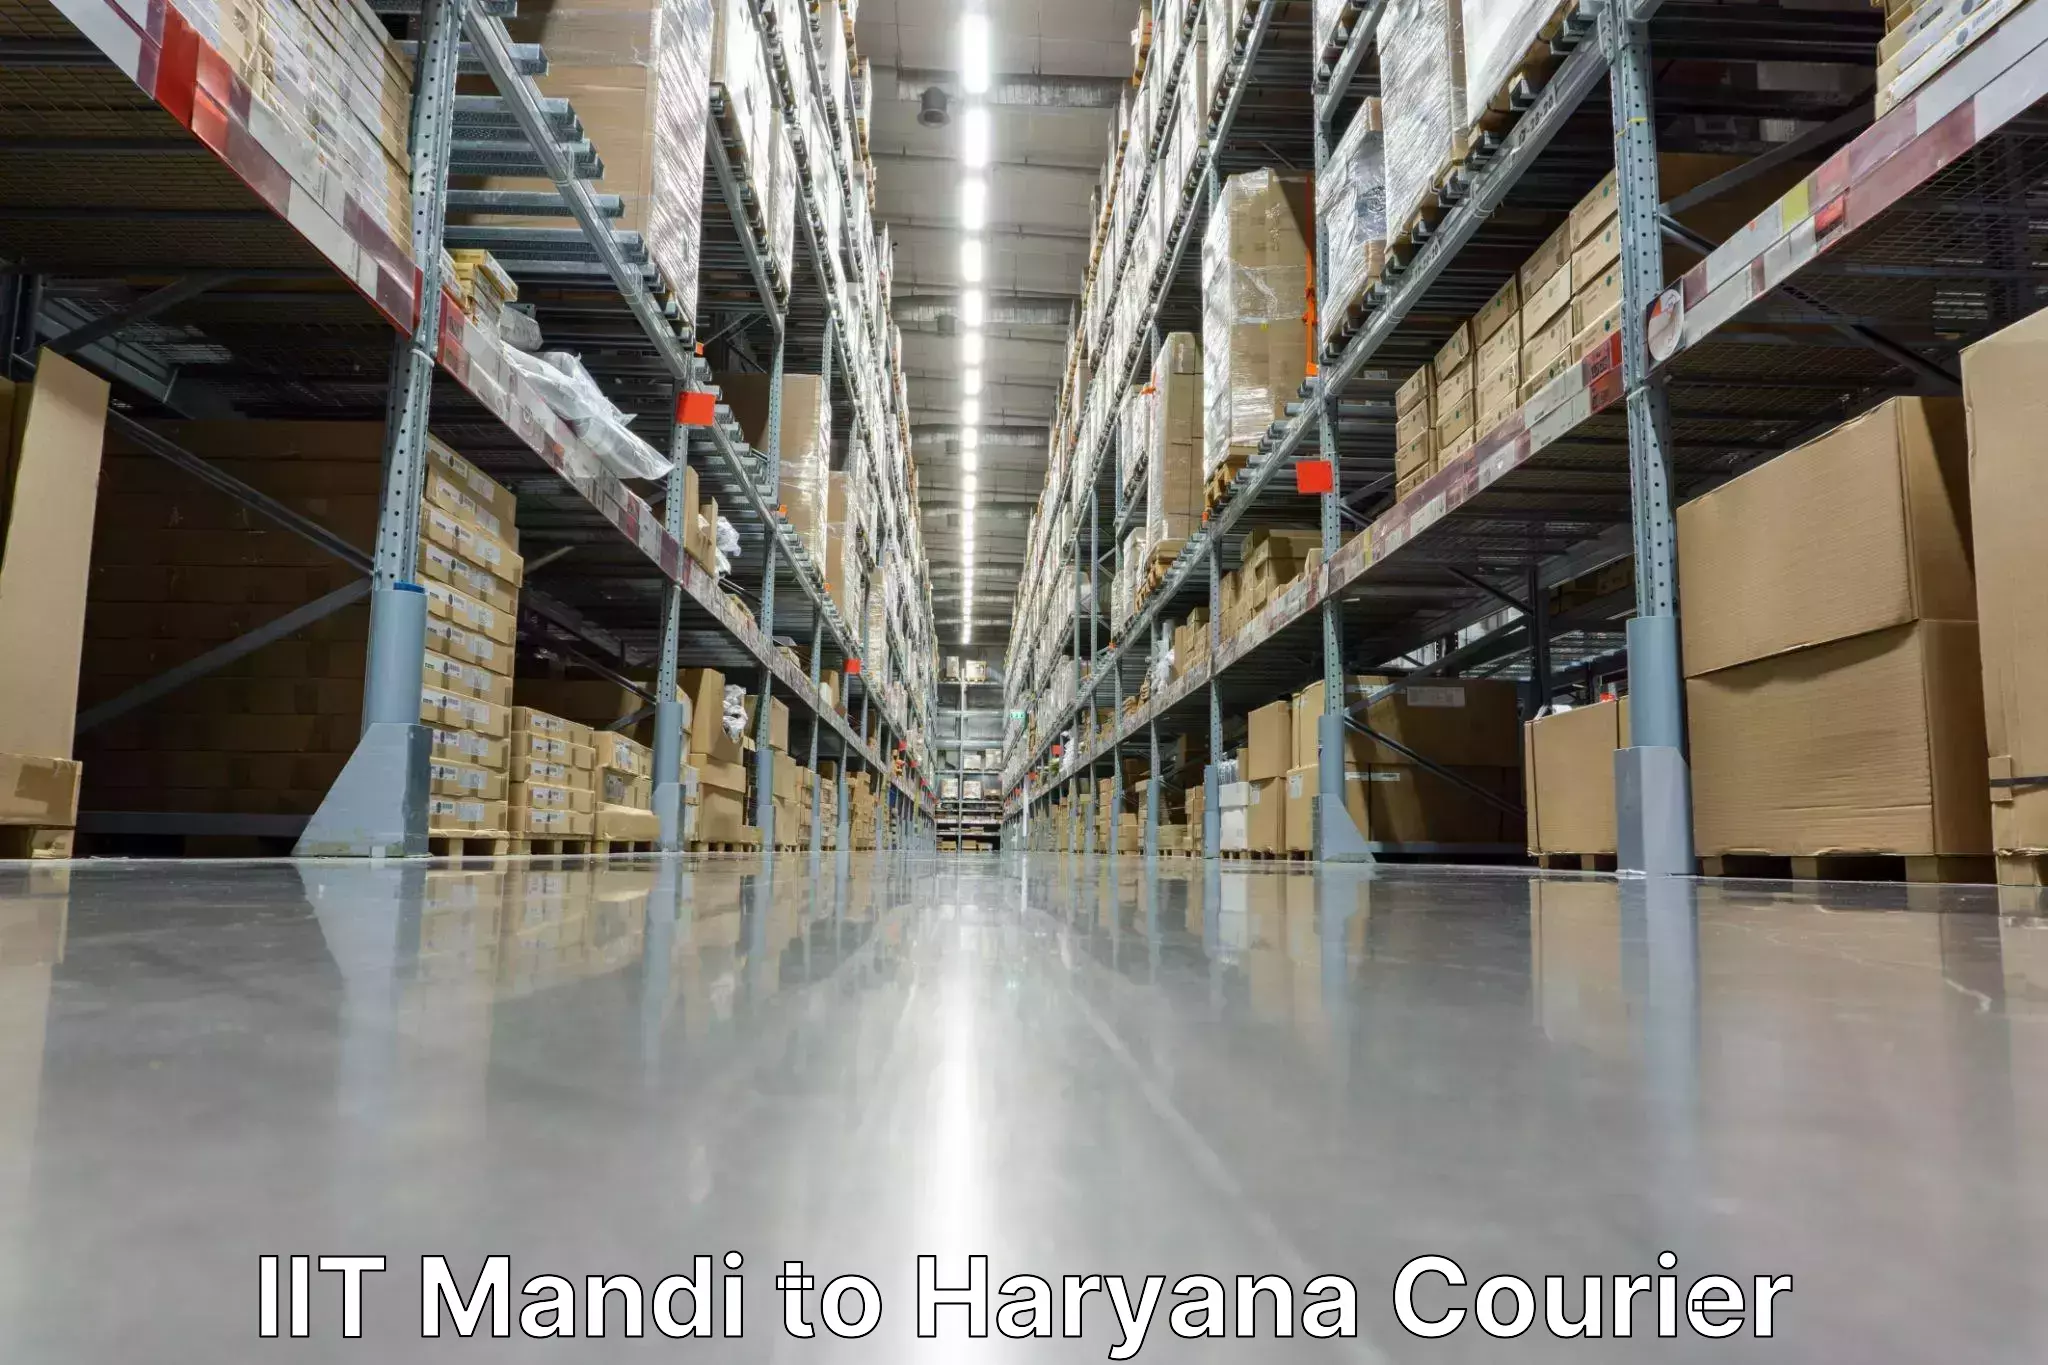 End-to-end delivery IIT Mandi to Yamuna Nagar